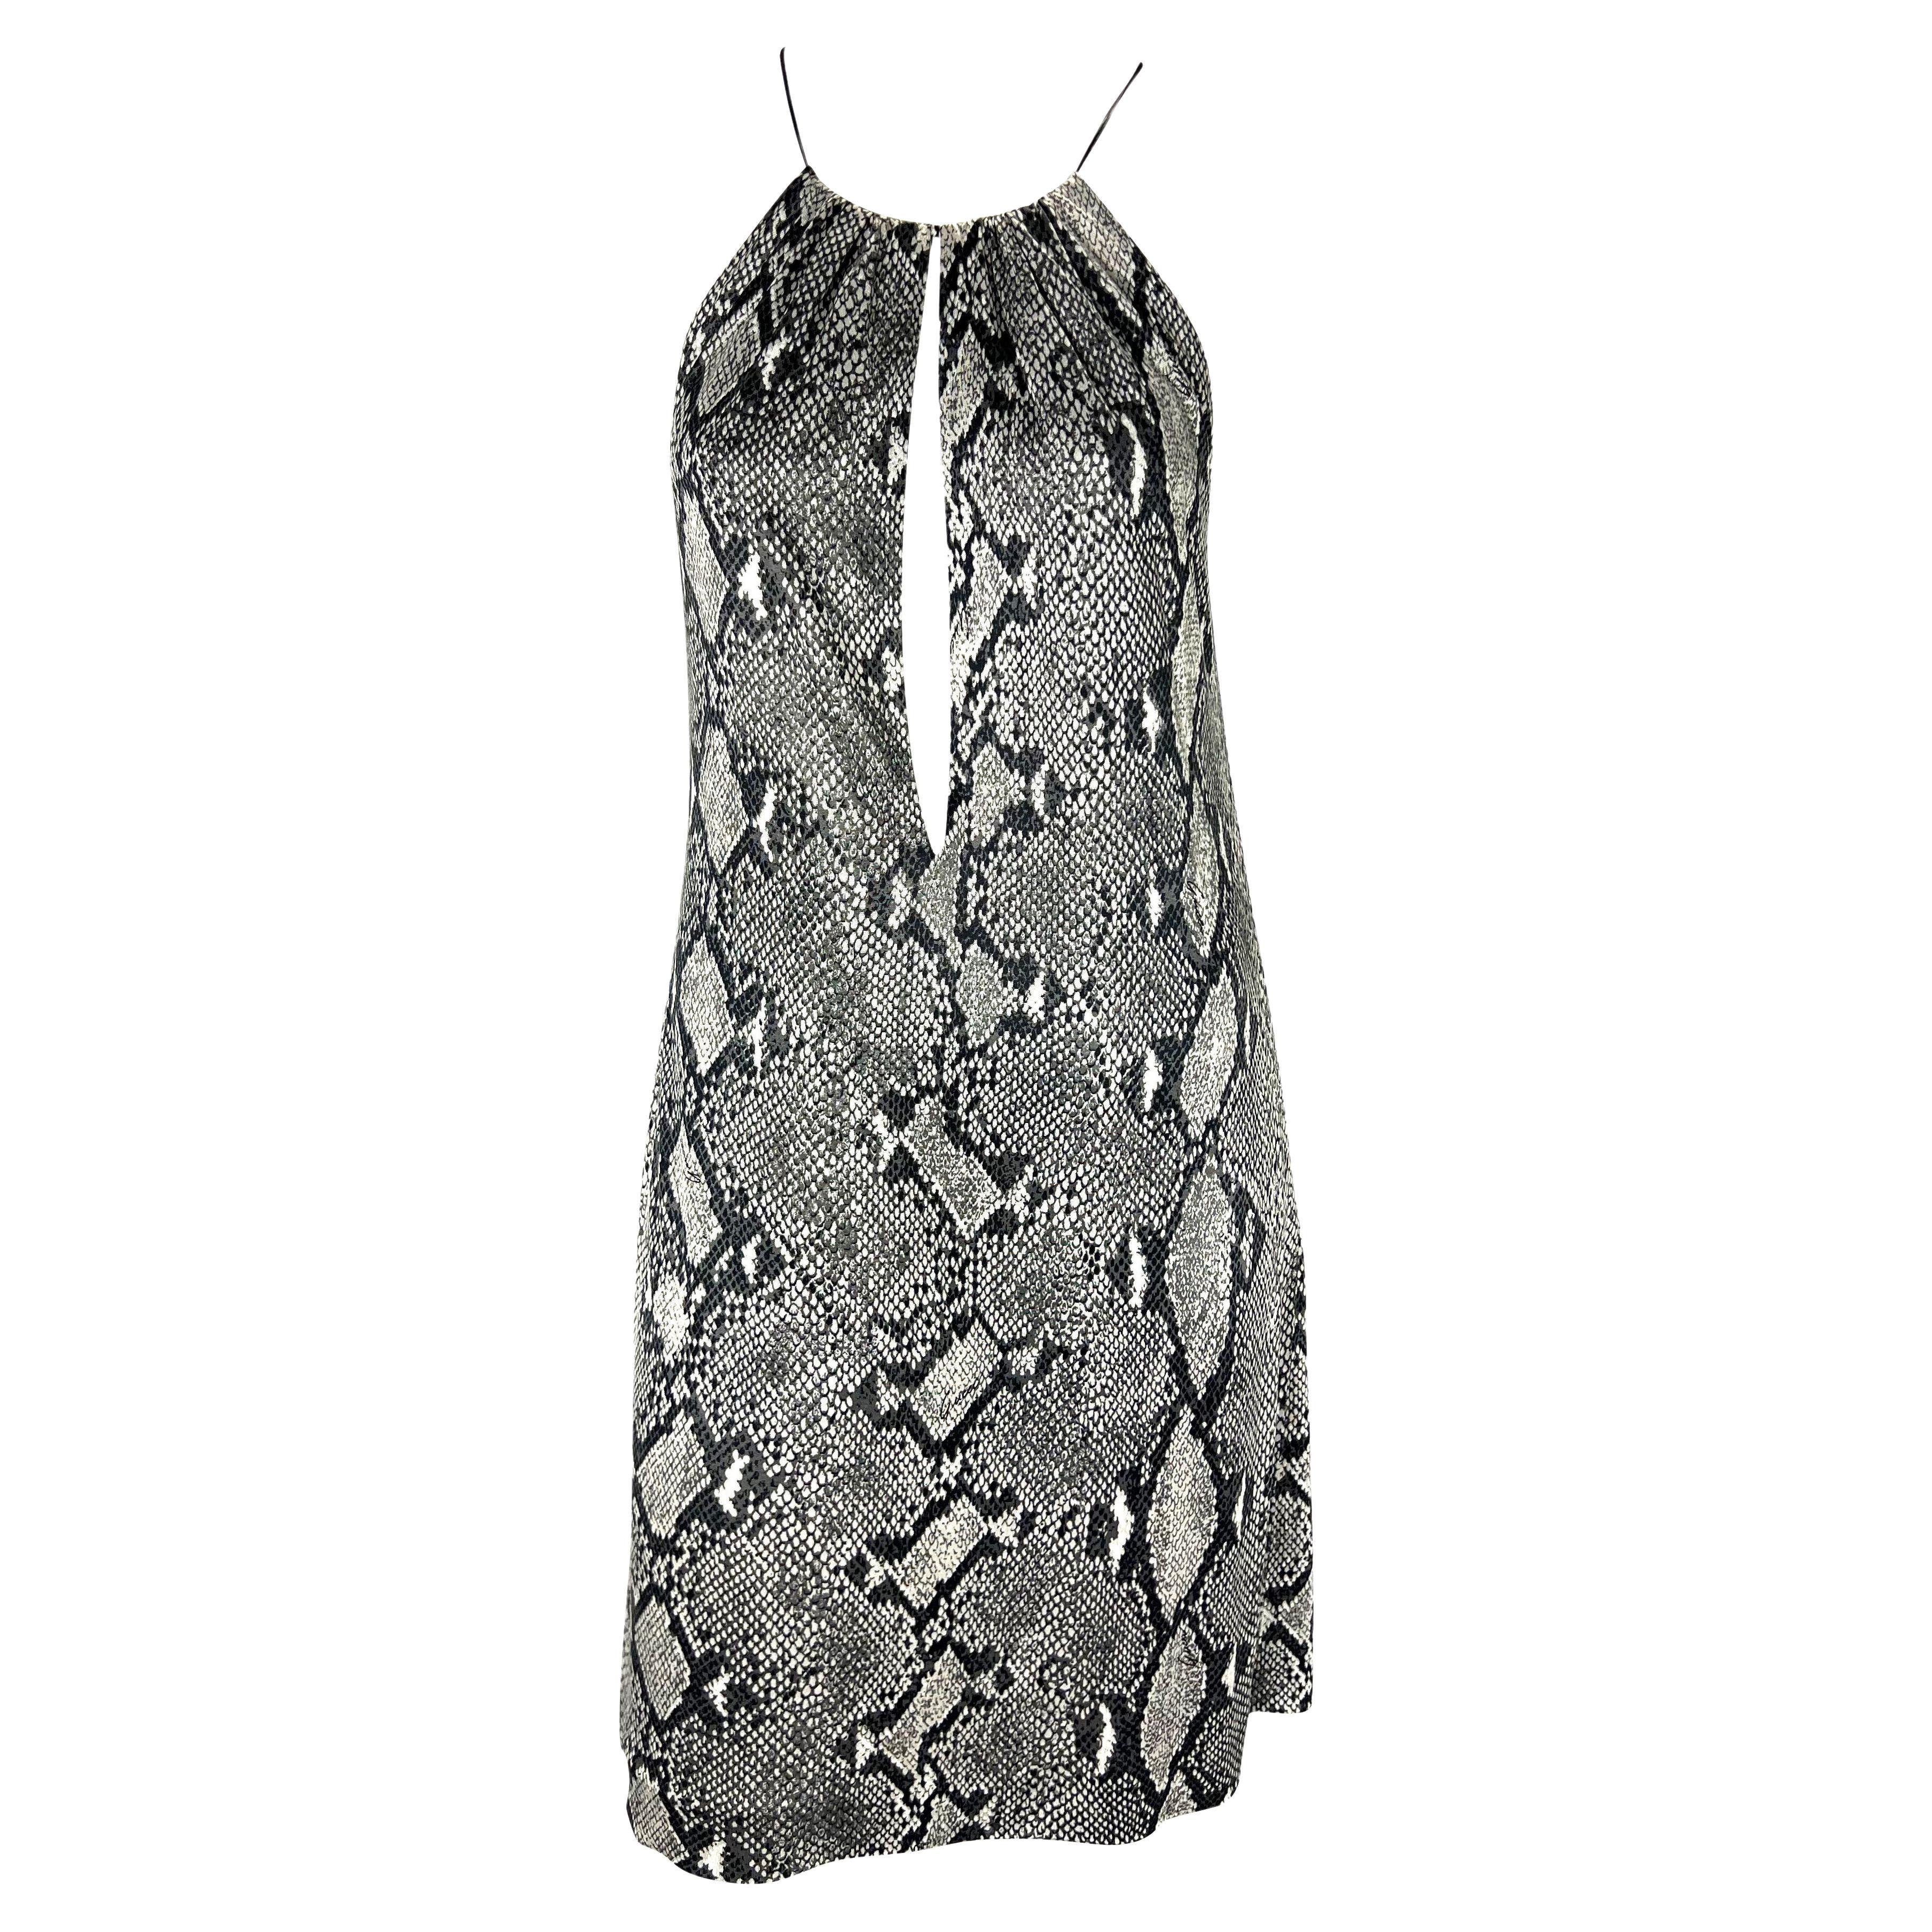 S/S 2000 Gucci by Tom Ford Snake Print Viscose Leather Strap Plunging Dress For Sale